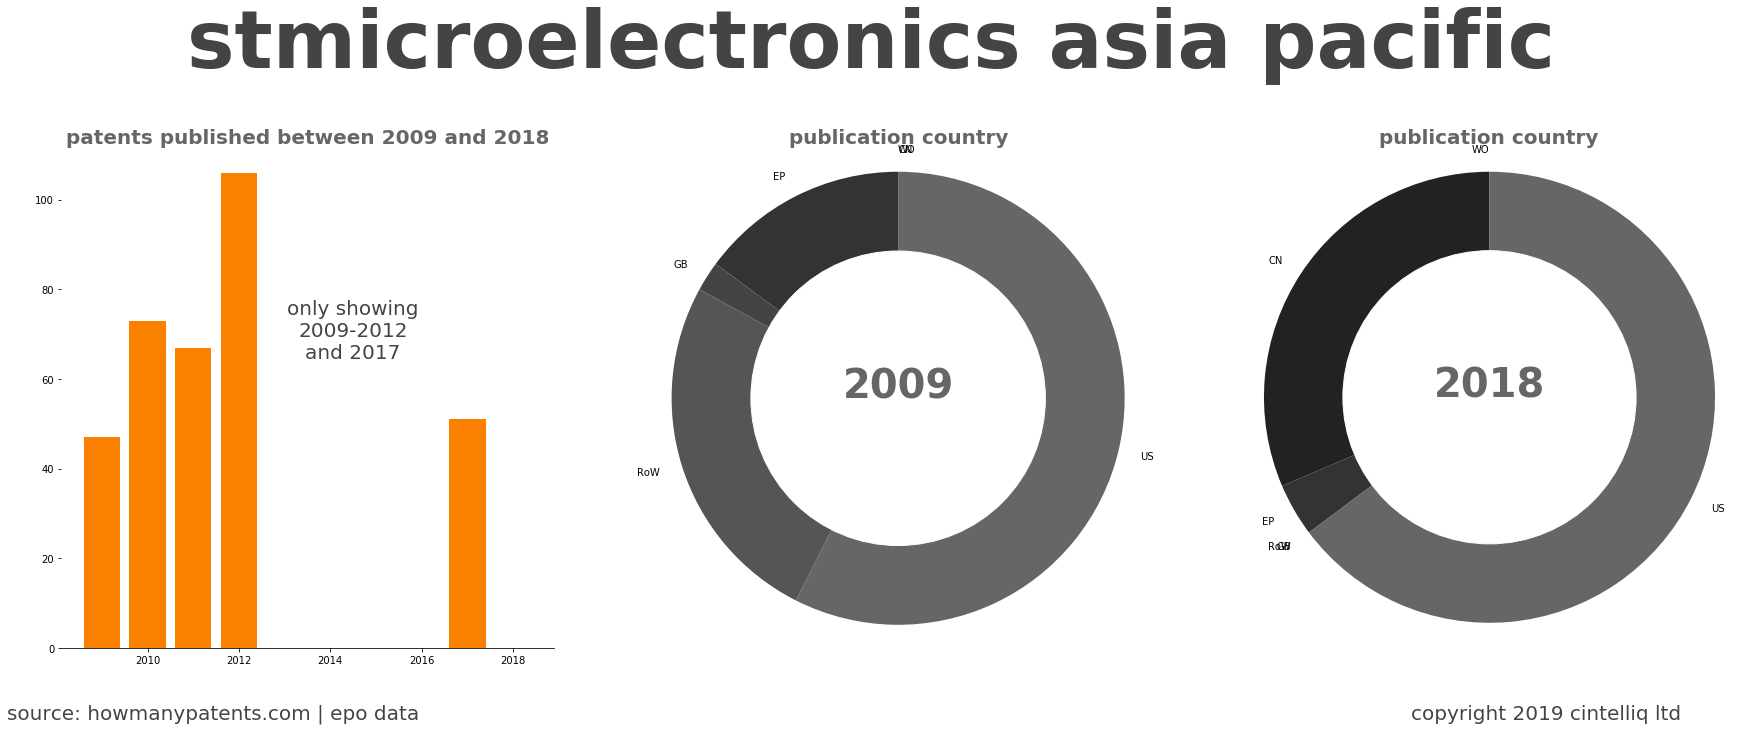 summary of patents for Stmicroelectronics Asia Pacific